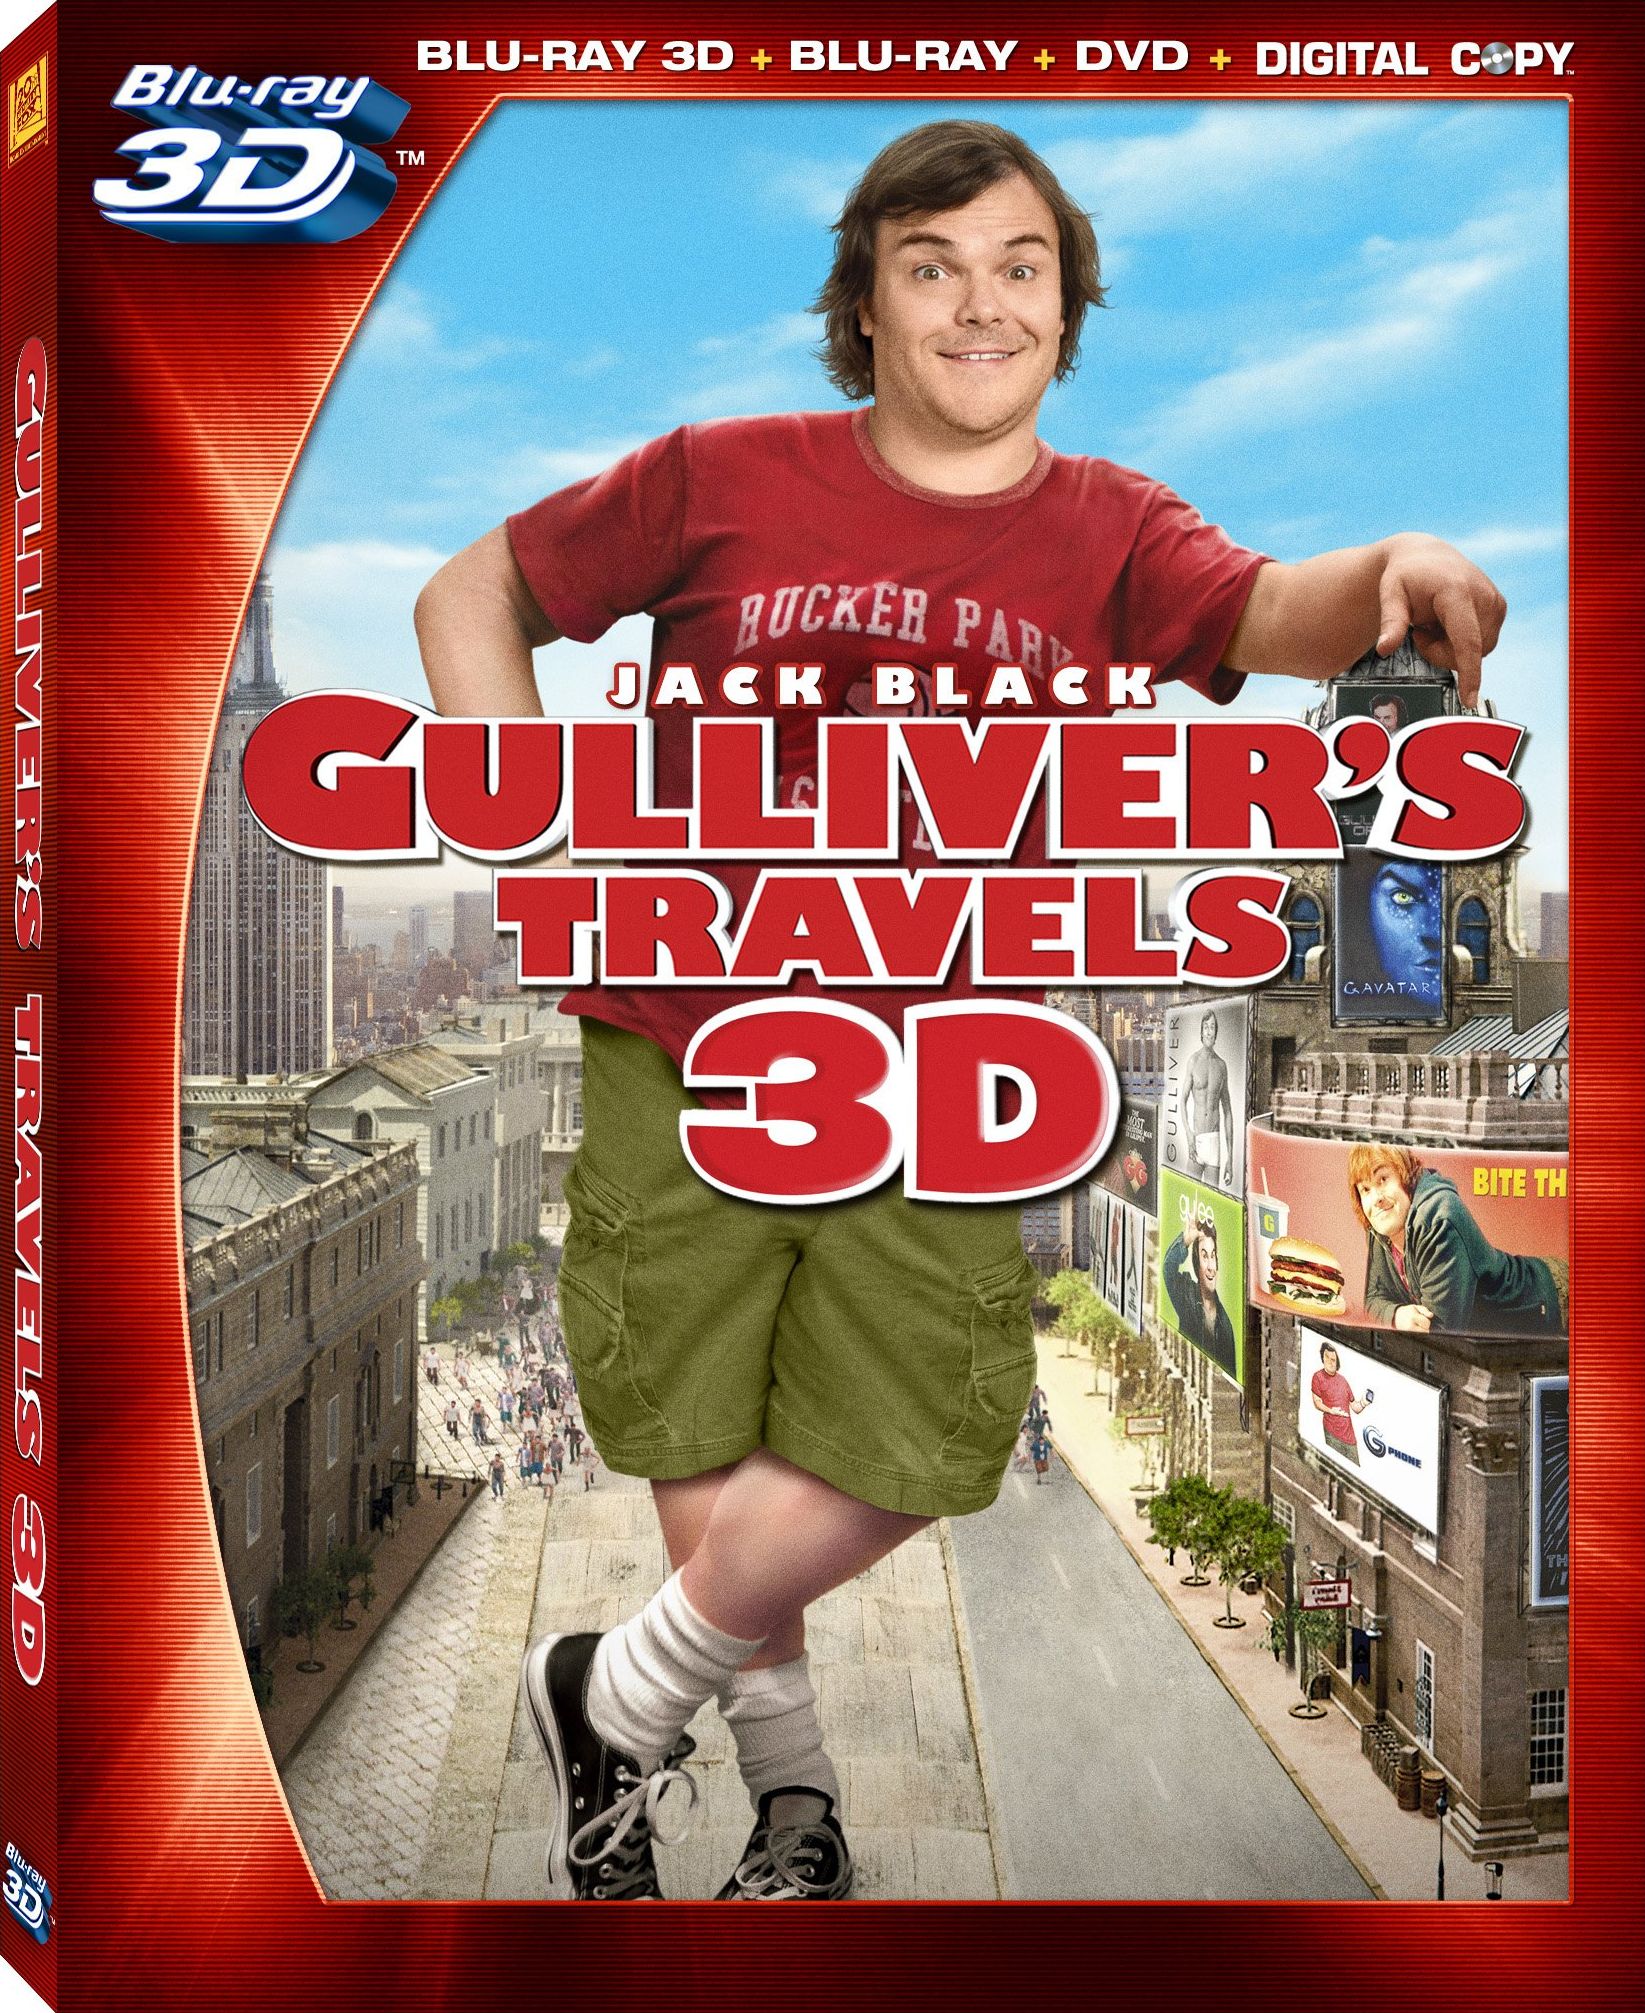 Gulliver's Travels DVD Release Date April 19, 2011